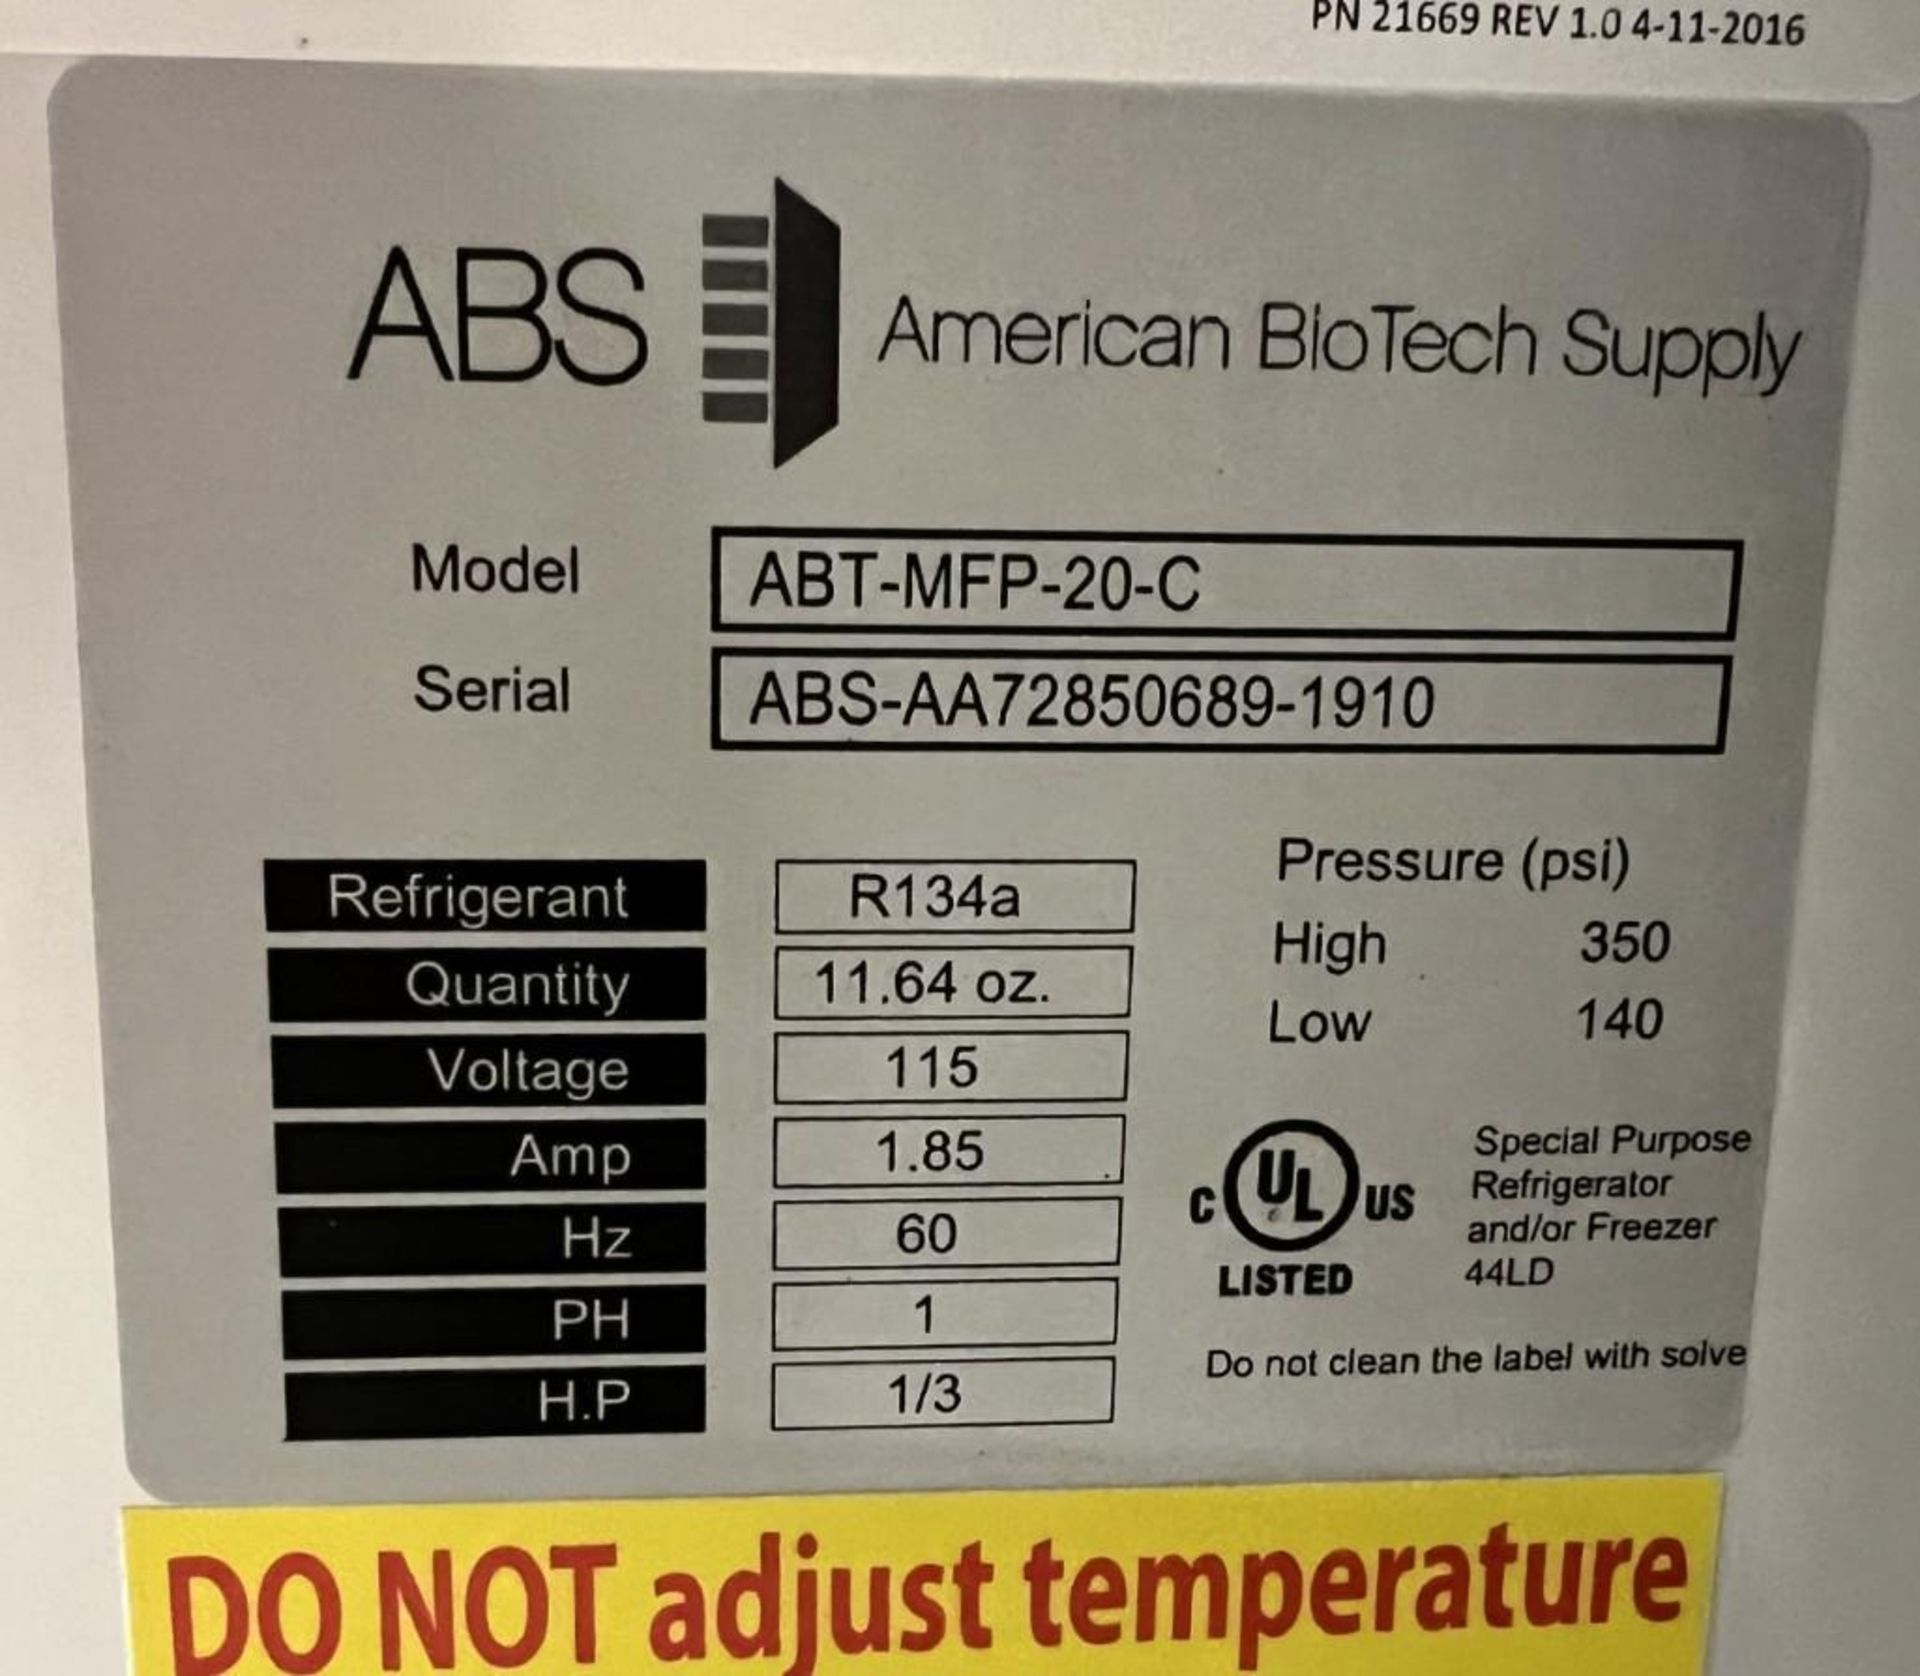 ABS American Biotech Supply Chest Freezer, Model ABT-MFP-20-C, Serial# ABS-AA72850689-1910. - Image 6 of 6